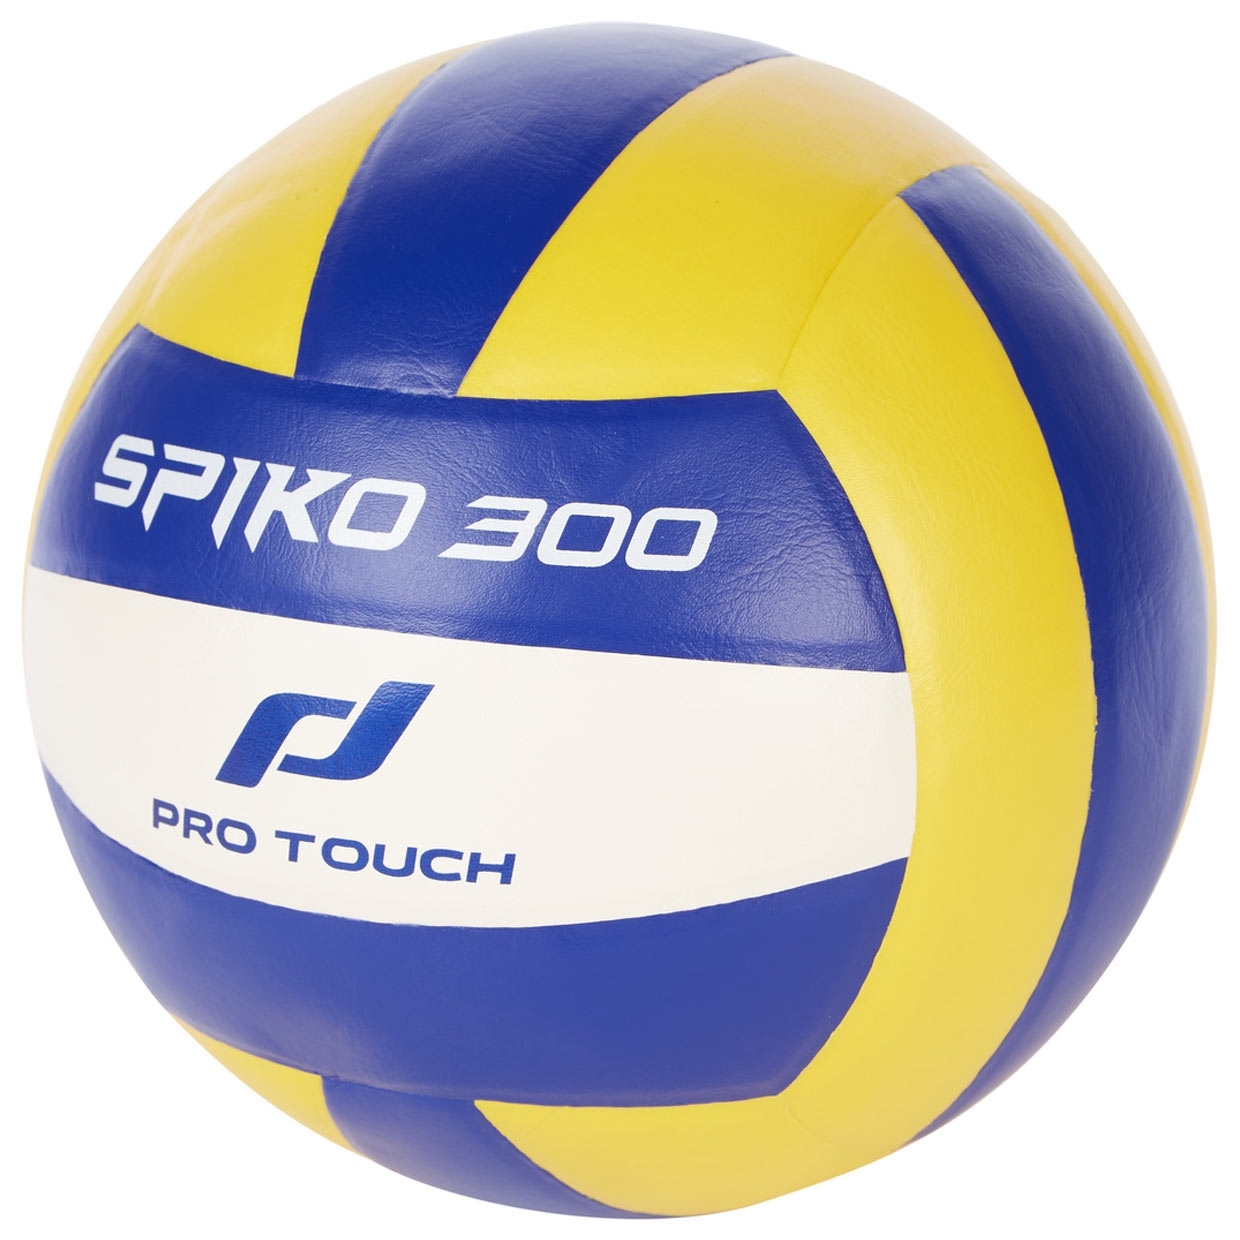 Volleyball Spiko 300